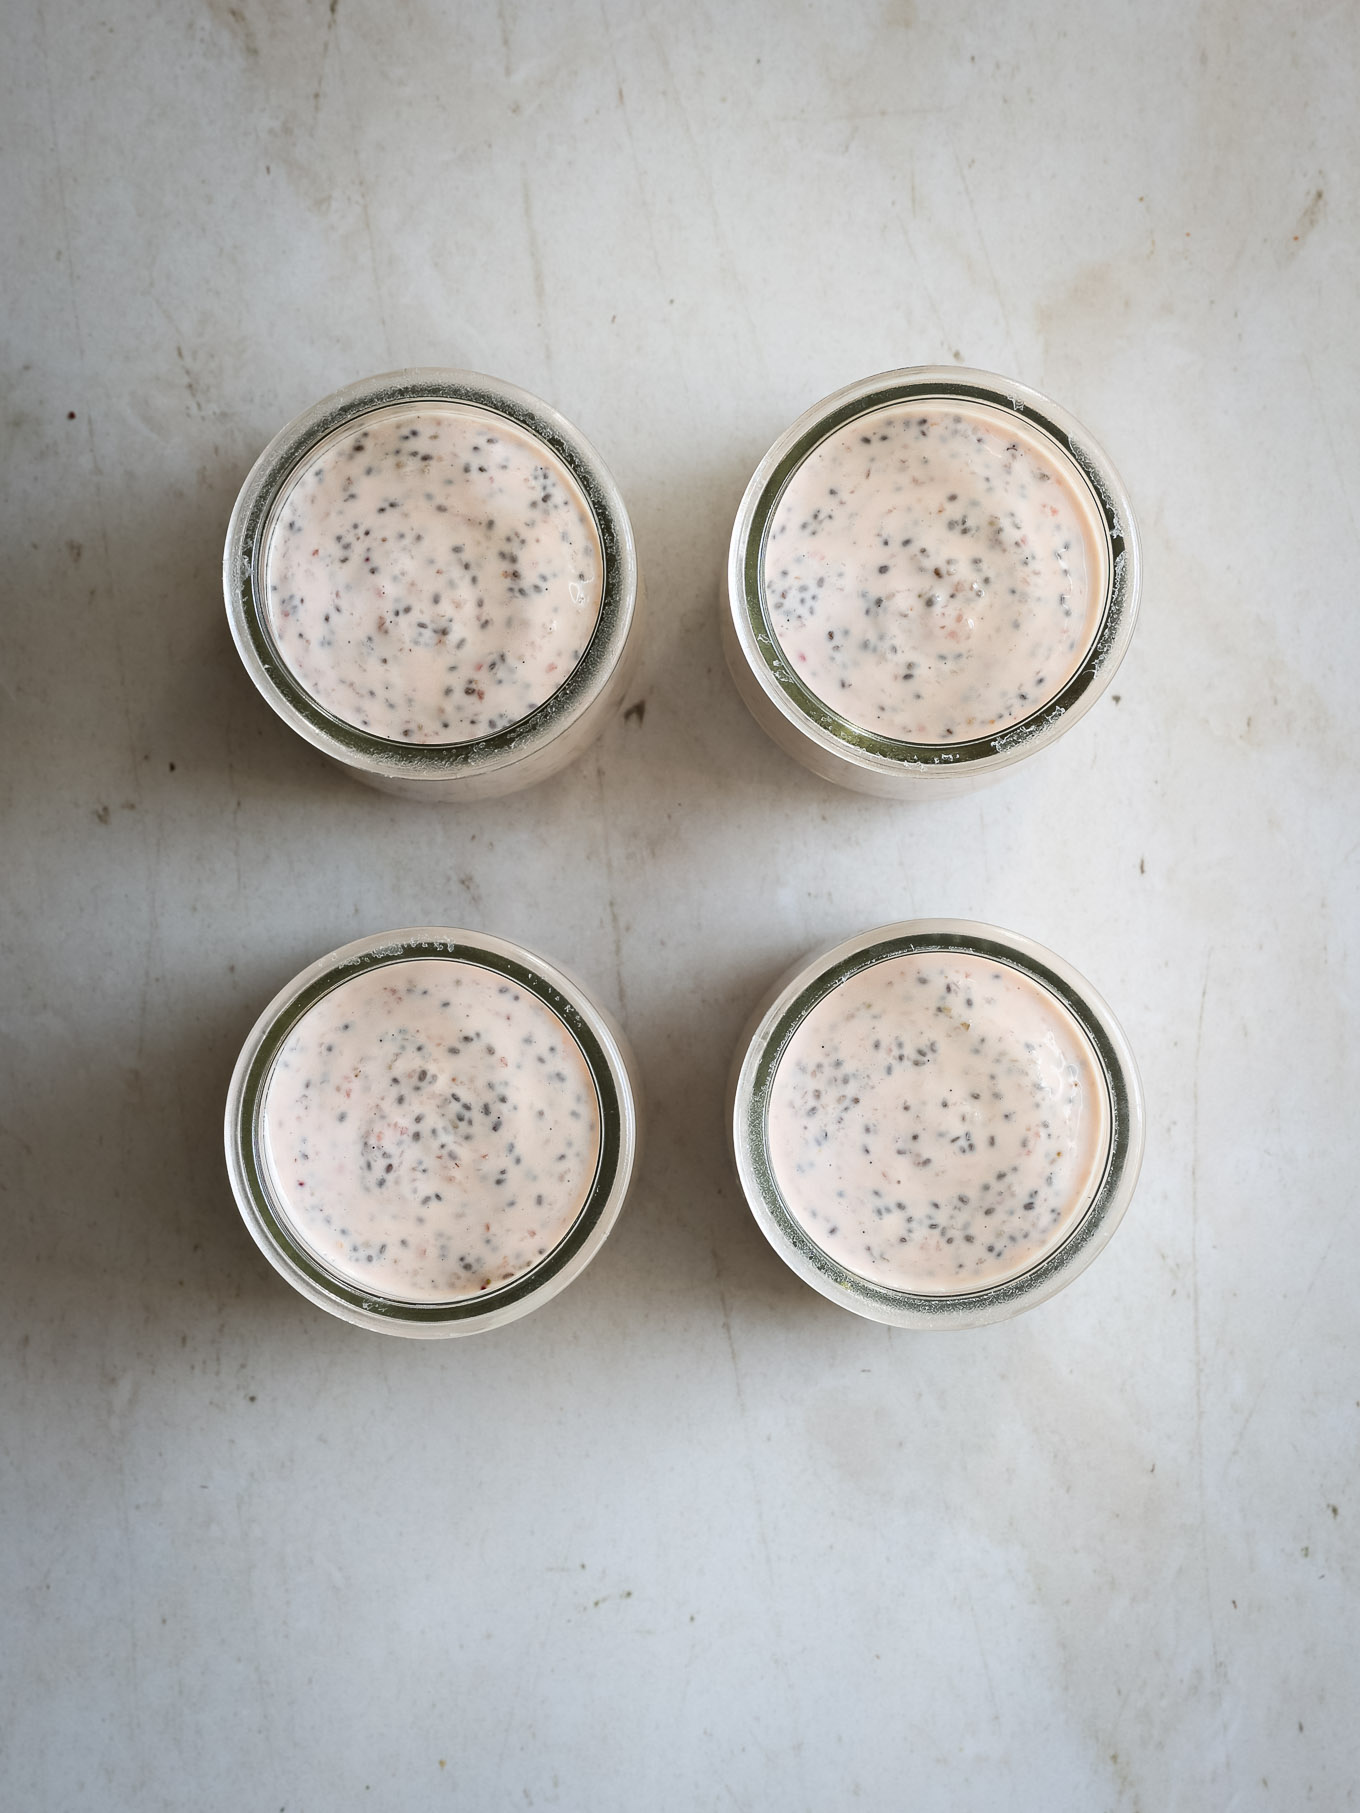 chia pudding in glass jars.